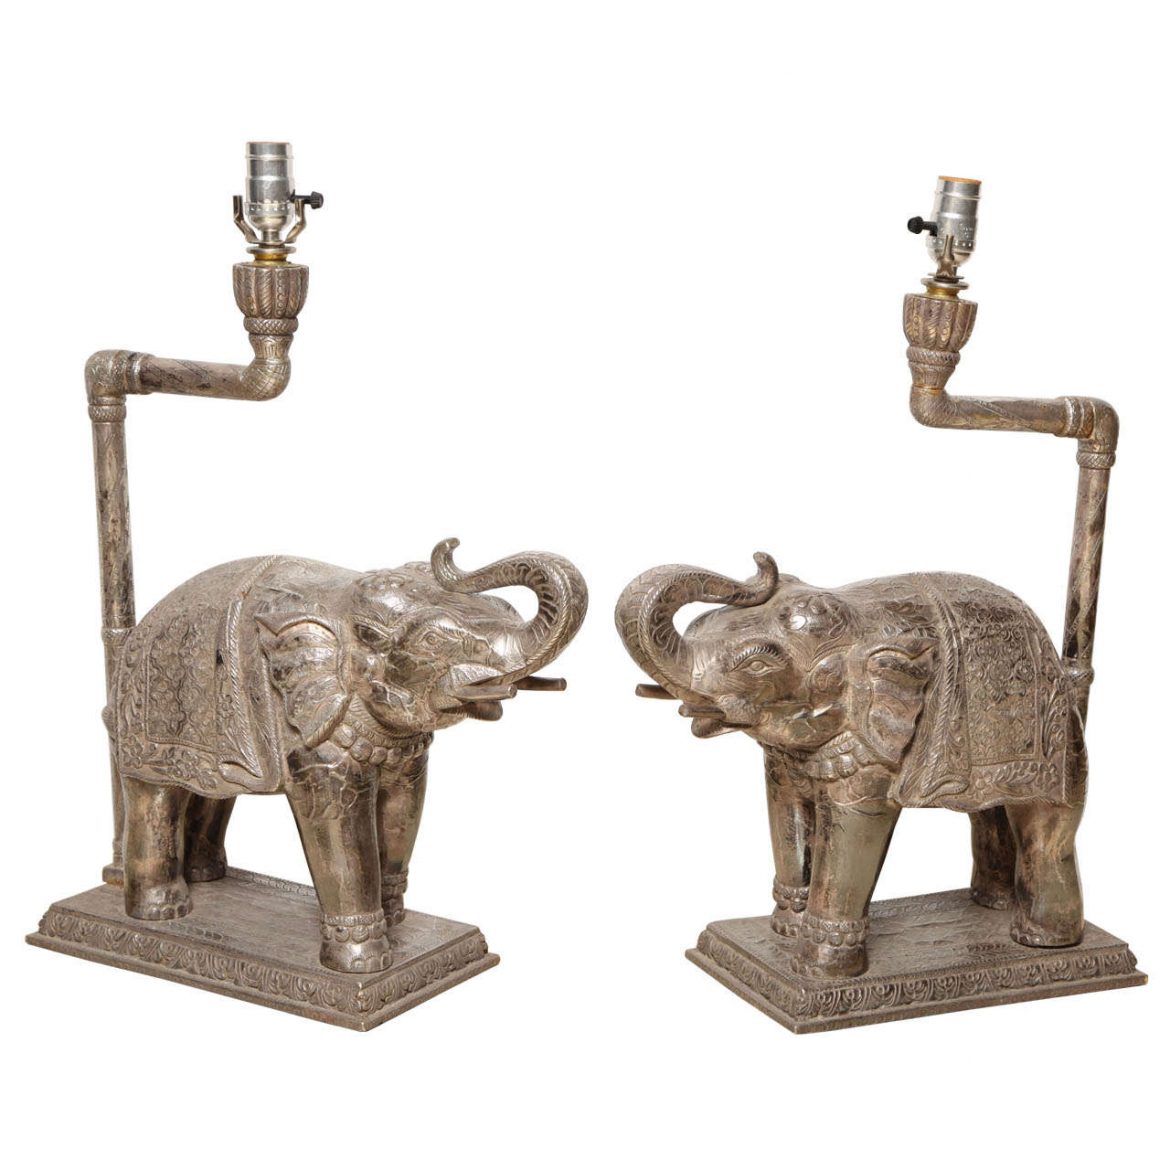 Pair of Very Unusual Indian Silver Clad Elephant Shaped Table Lamps